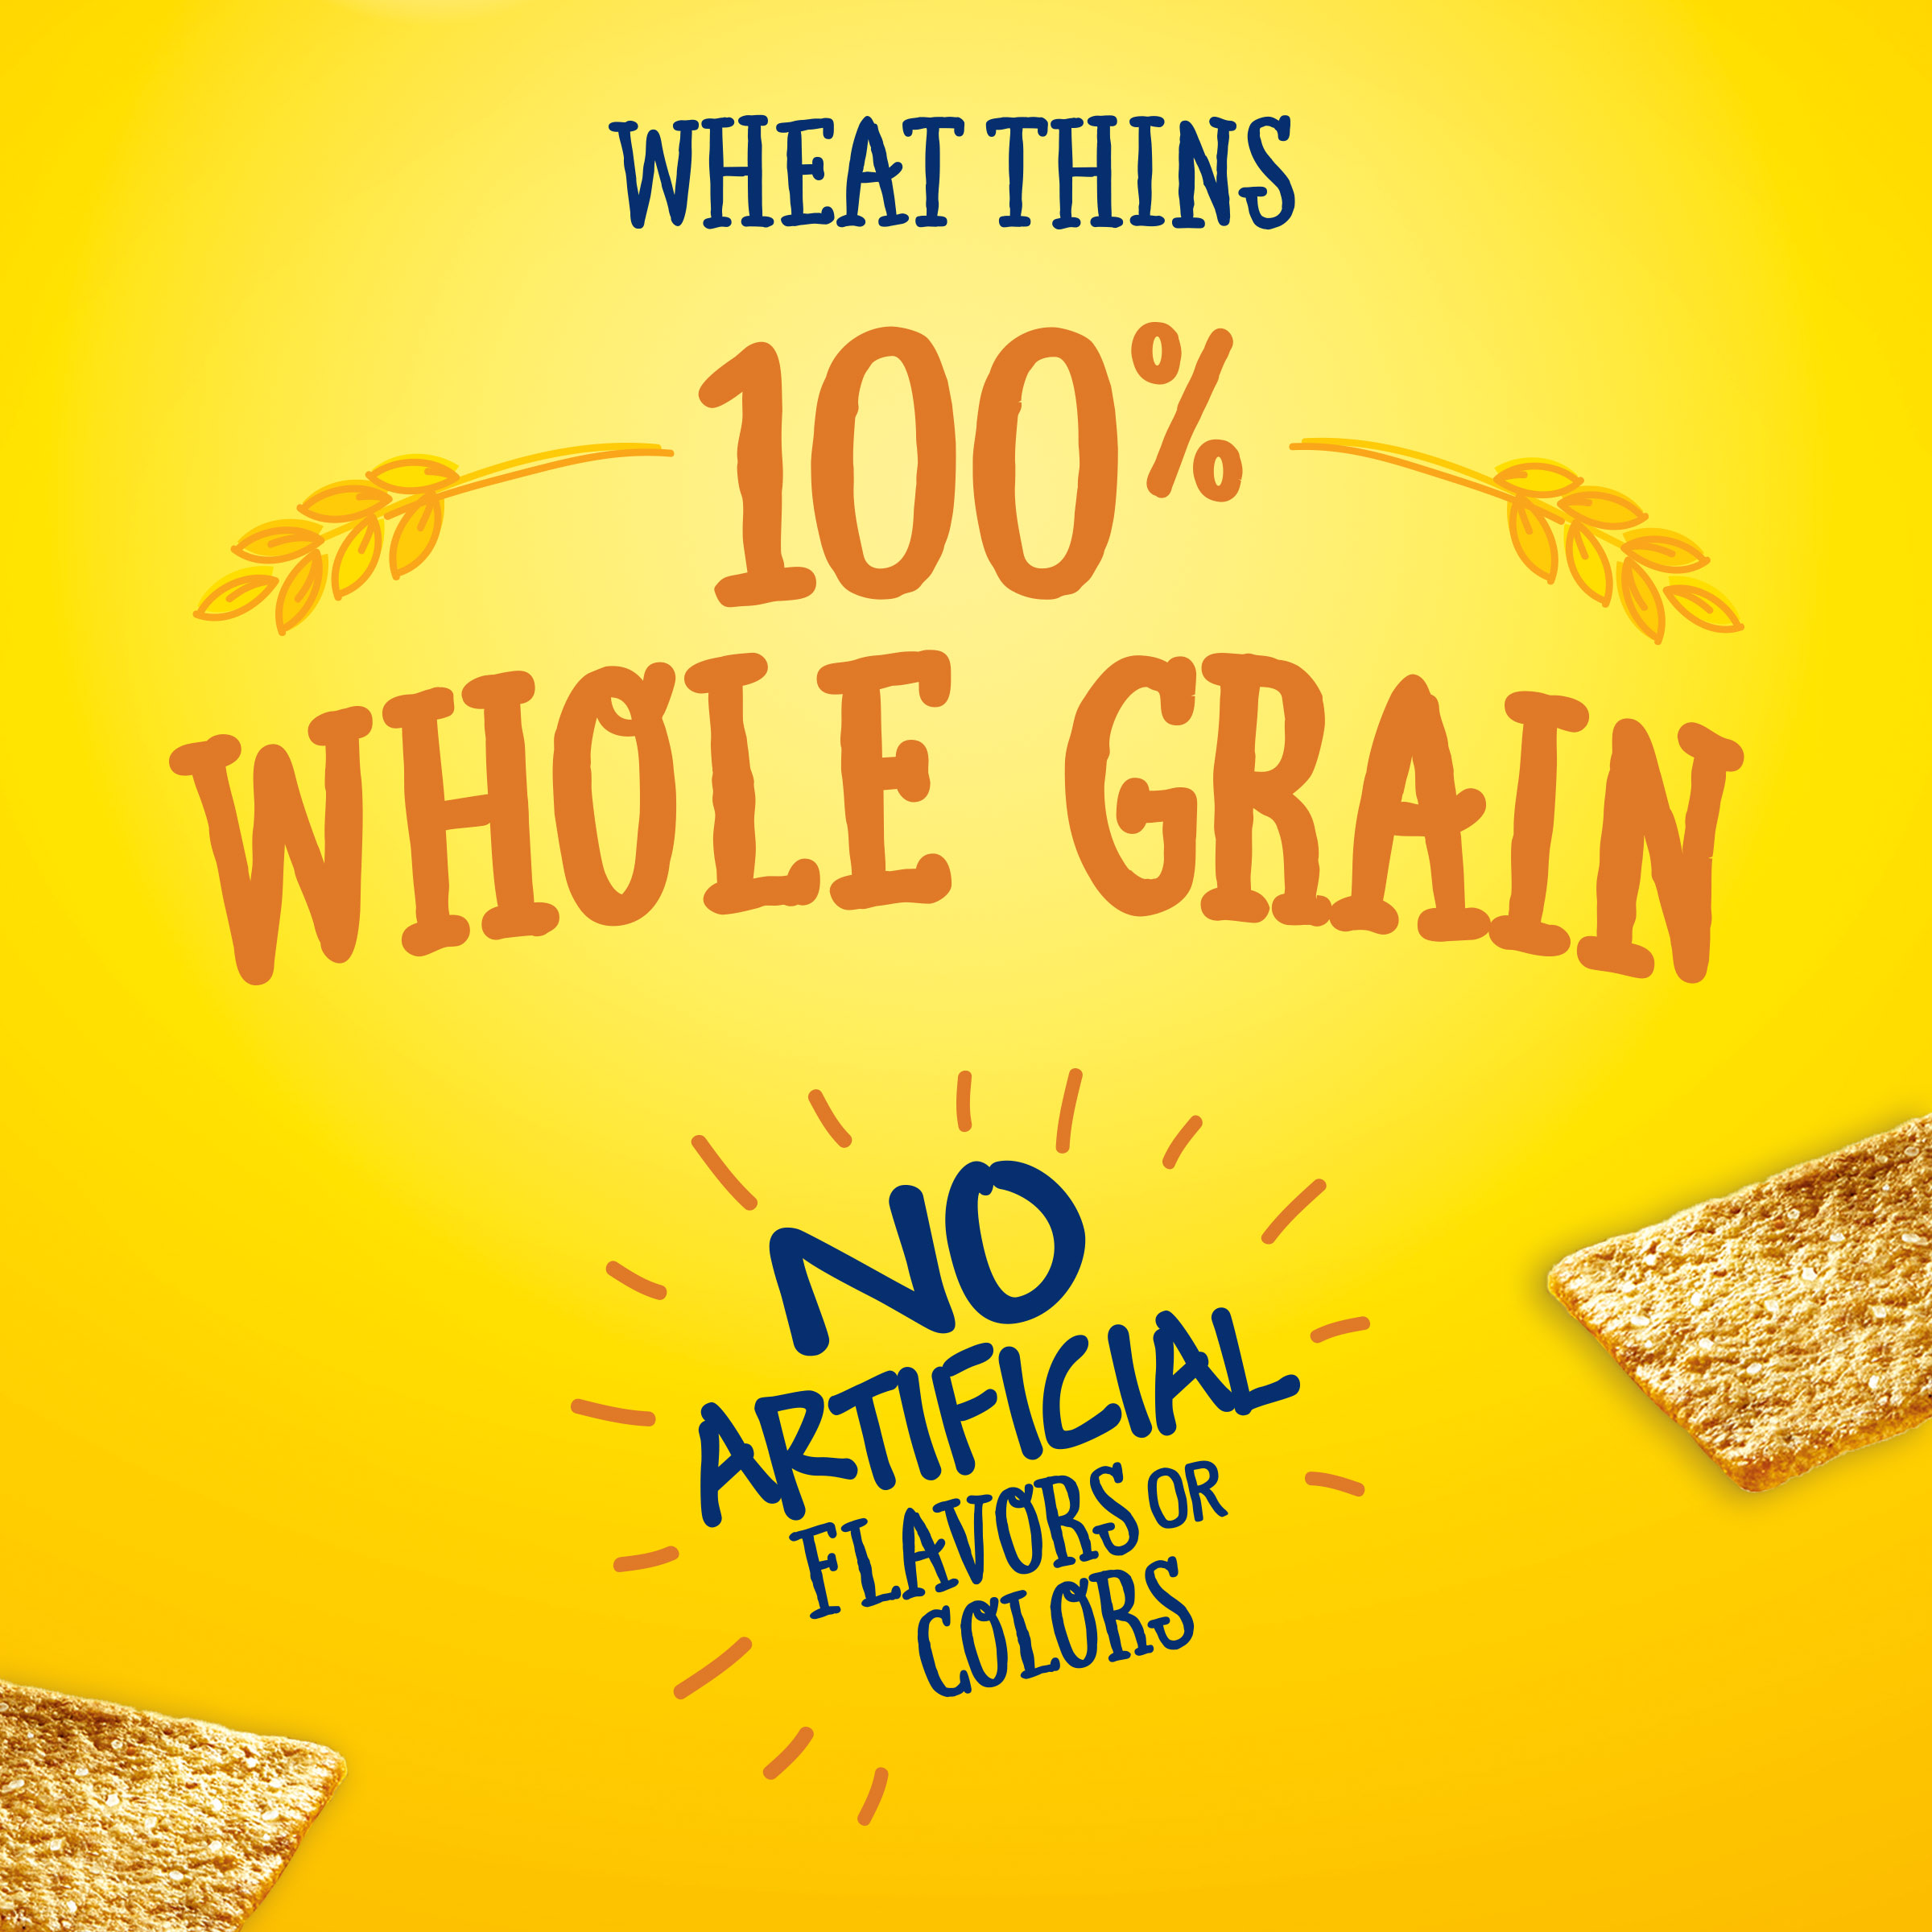 Wheat Thins Original Whole Grain Wheat Crackers, Family Size, 16 oz - image 5 of 16